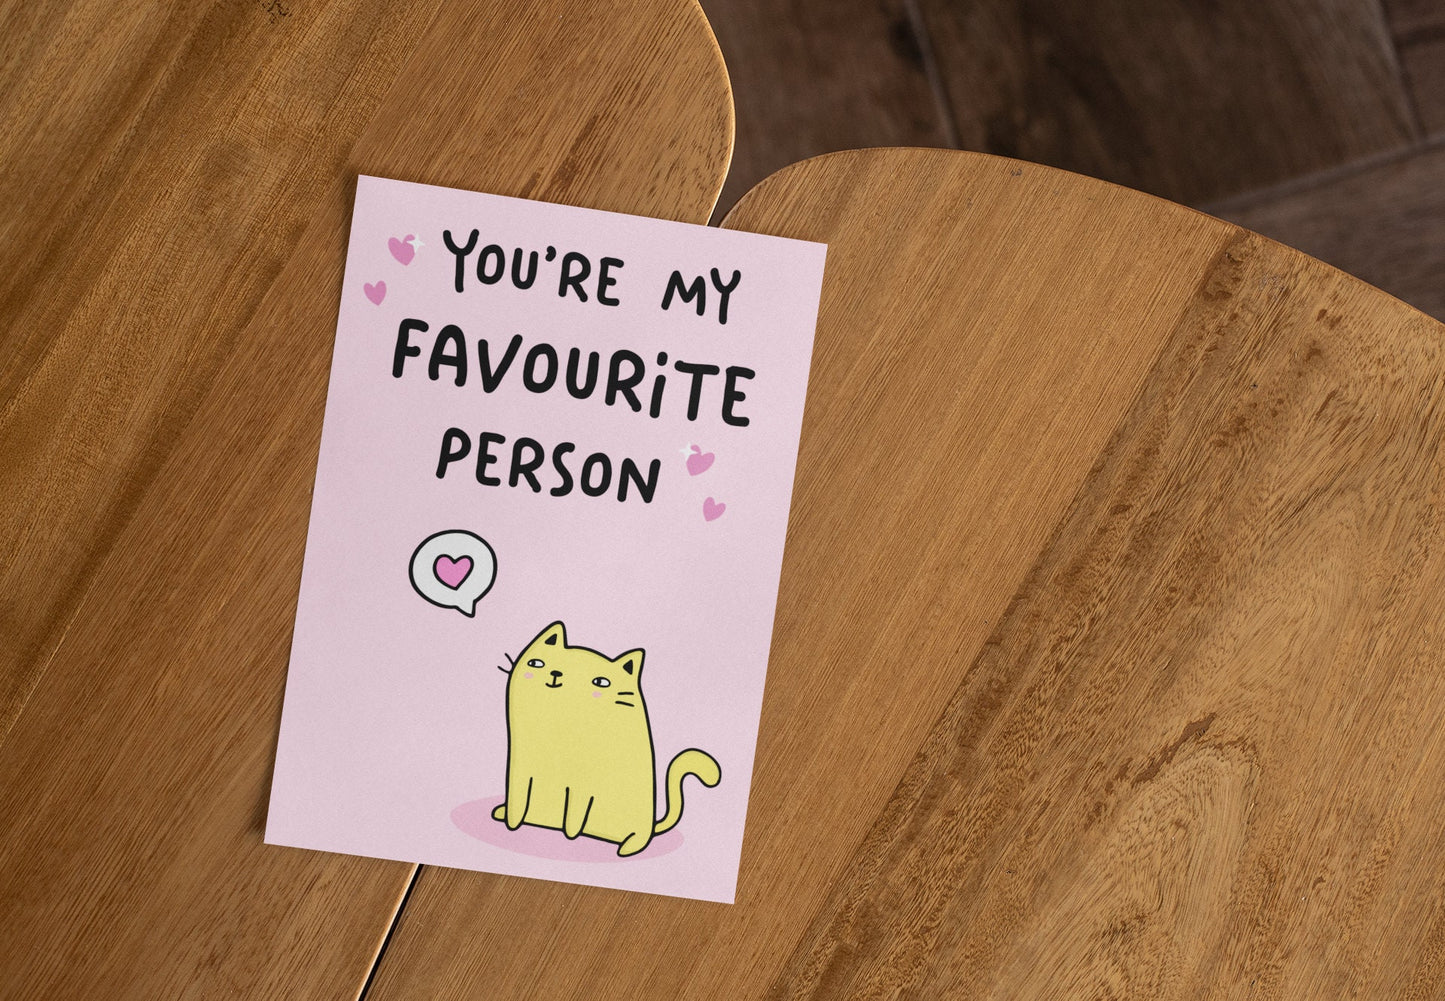 You're My Favourite Person Postcard | Miss You, Long Distance Gift, Missing You Gift, Cat Postcards